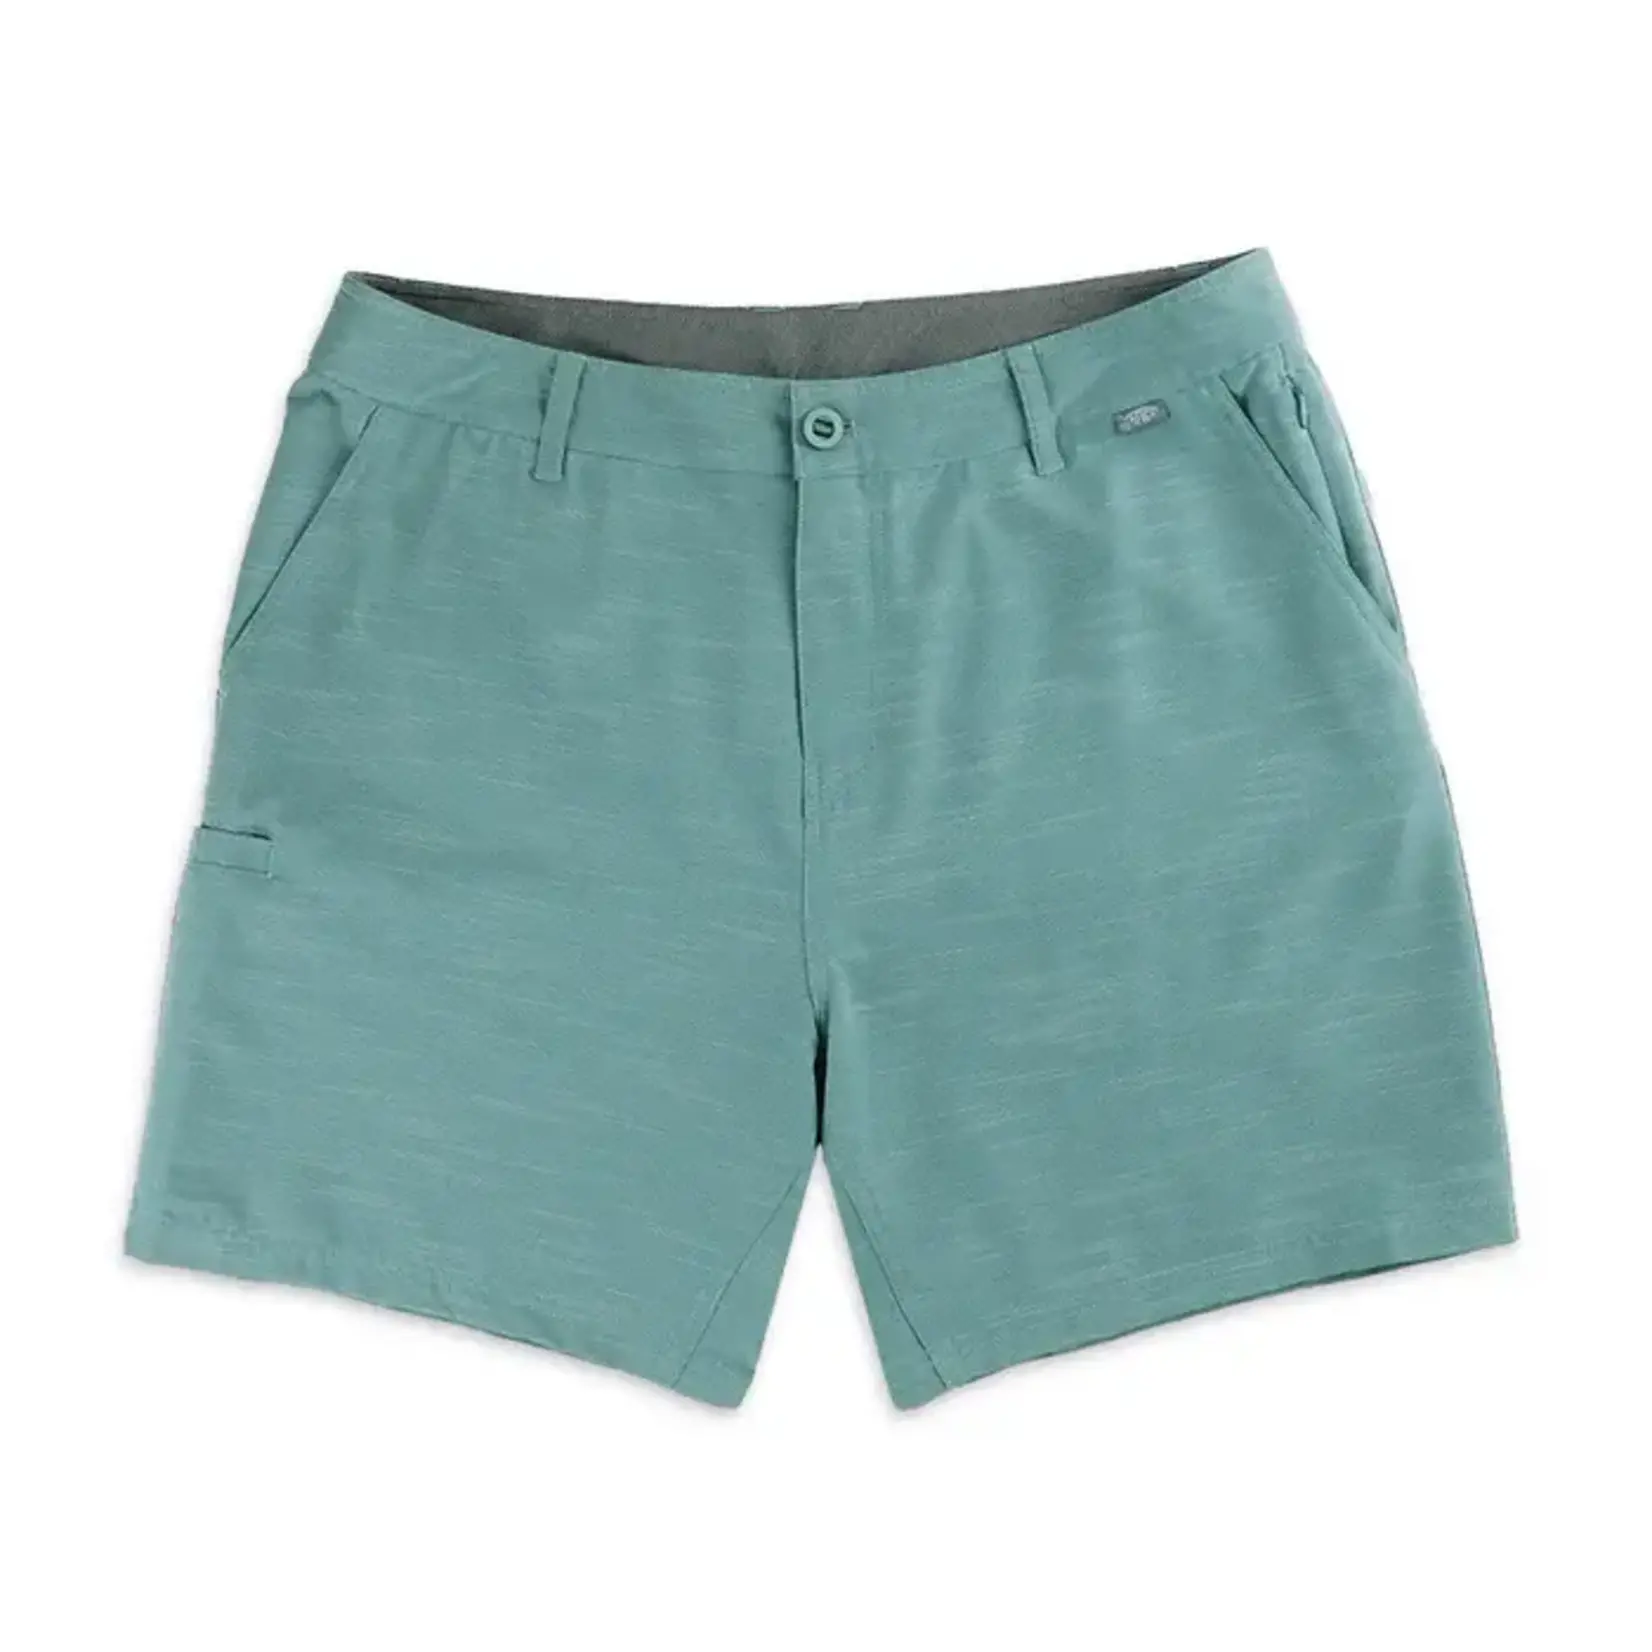 Aftco Aftco 365 Men's Hybrid Chino Shorts